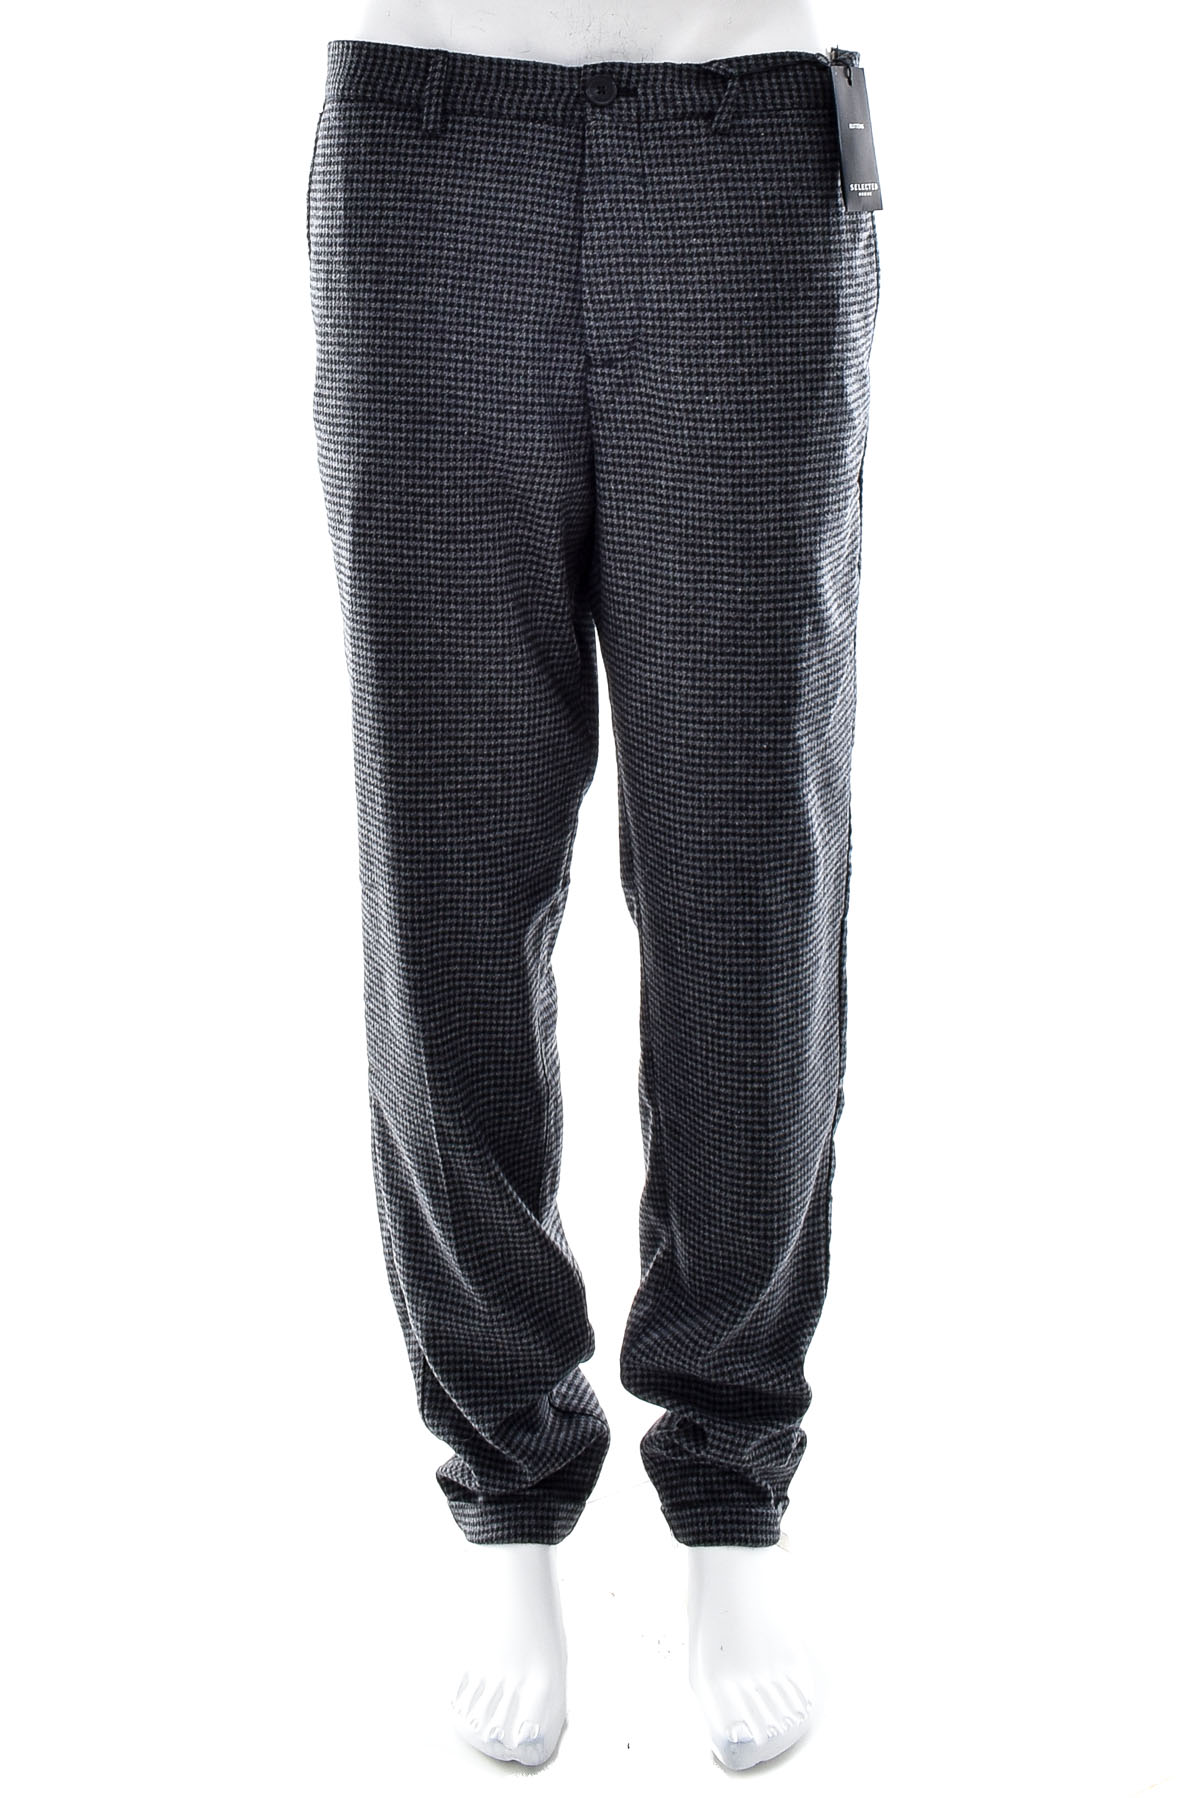 Men's trousers - SELECTED HOMME - 0